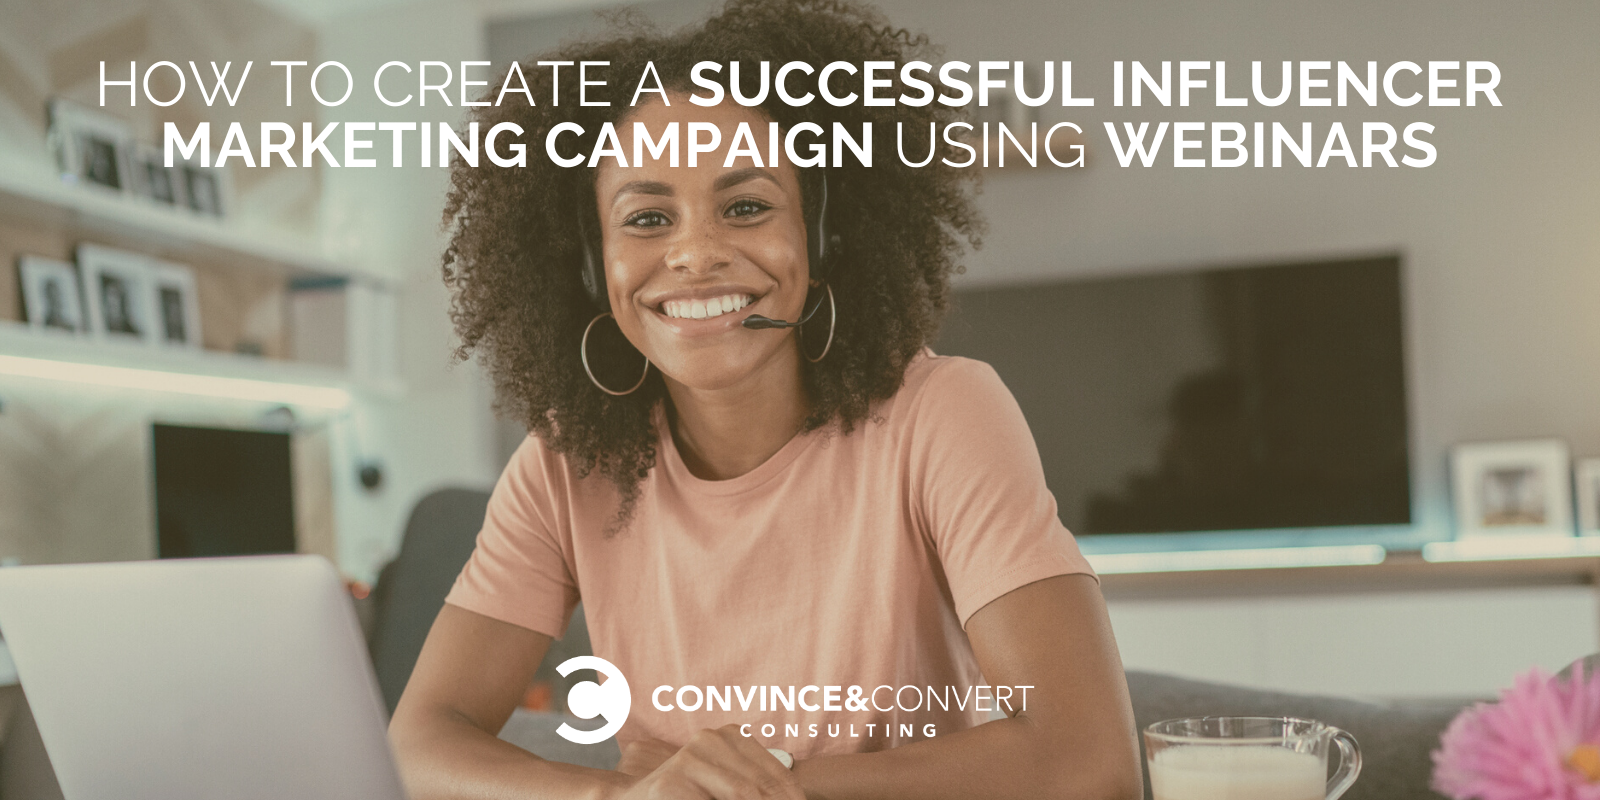 You are currently viewing How to Create a Successful Influencer Marketing Campaign Using Webinars